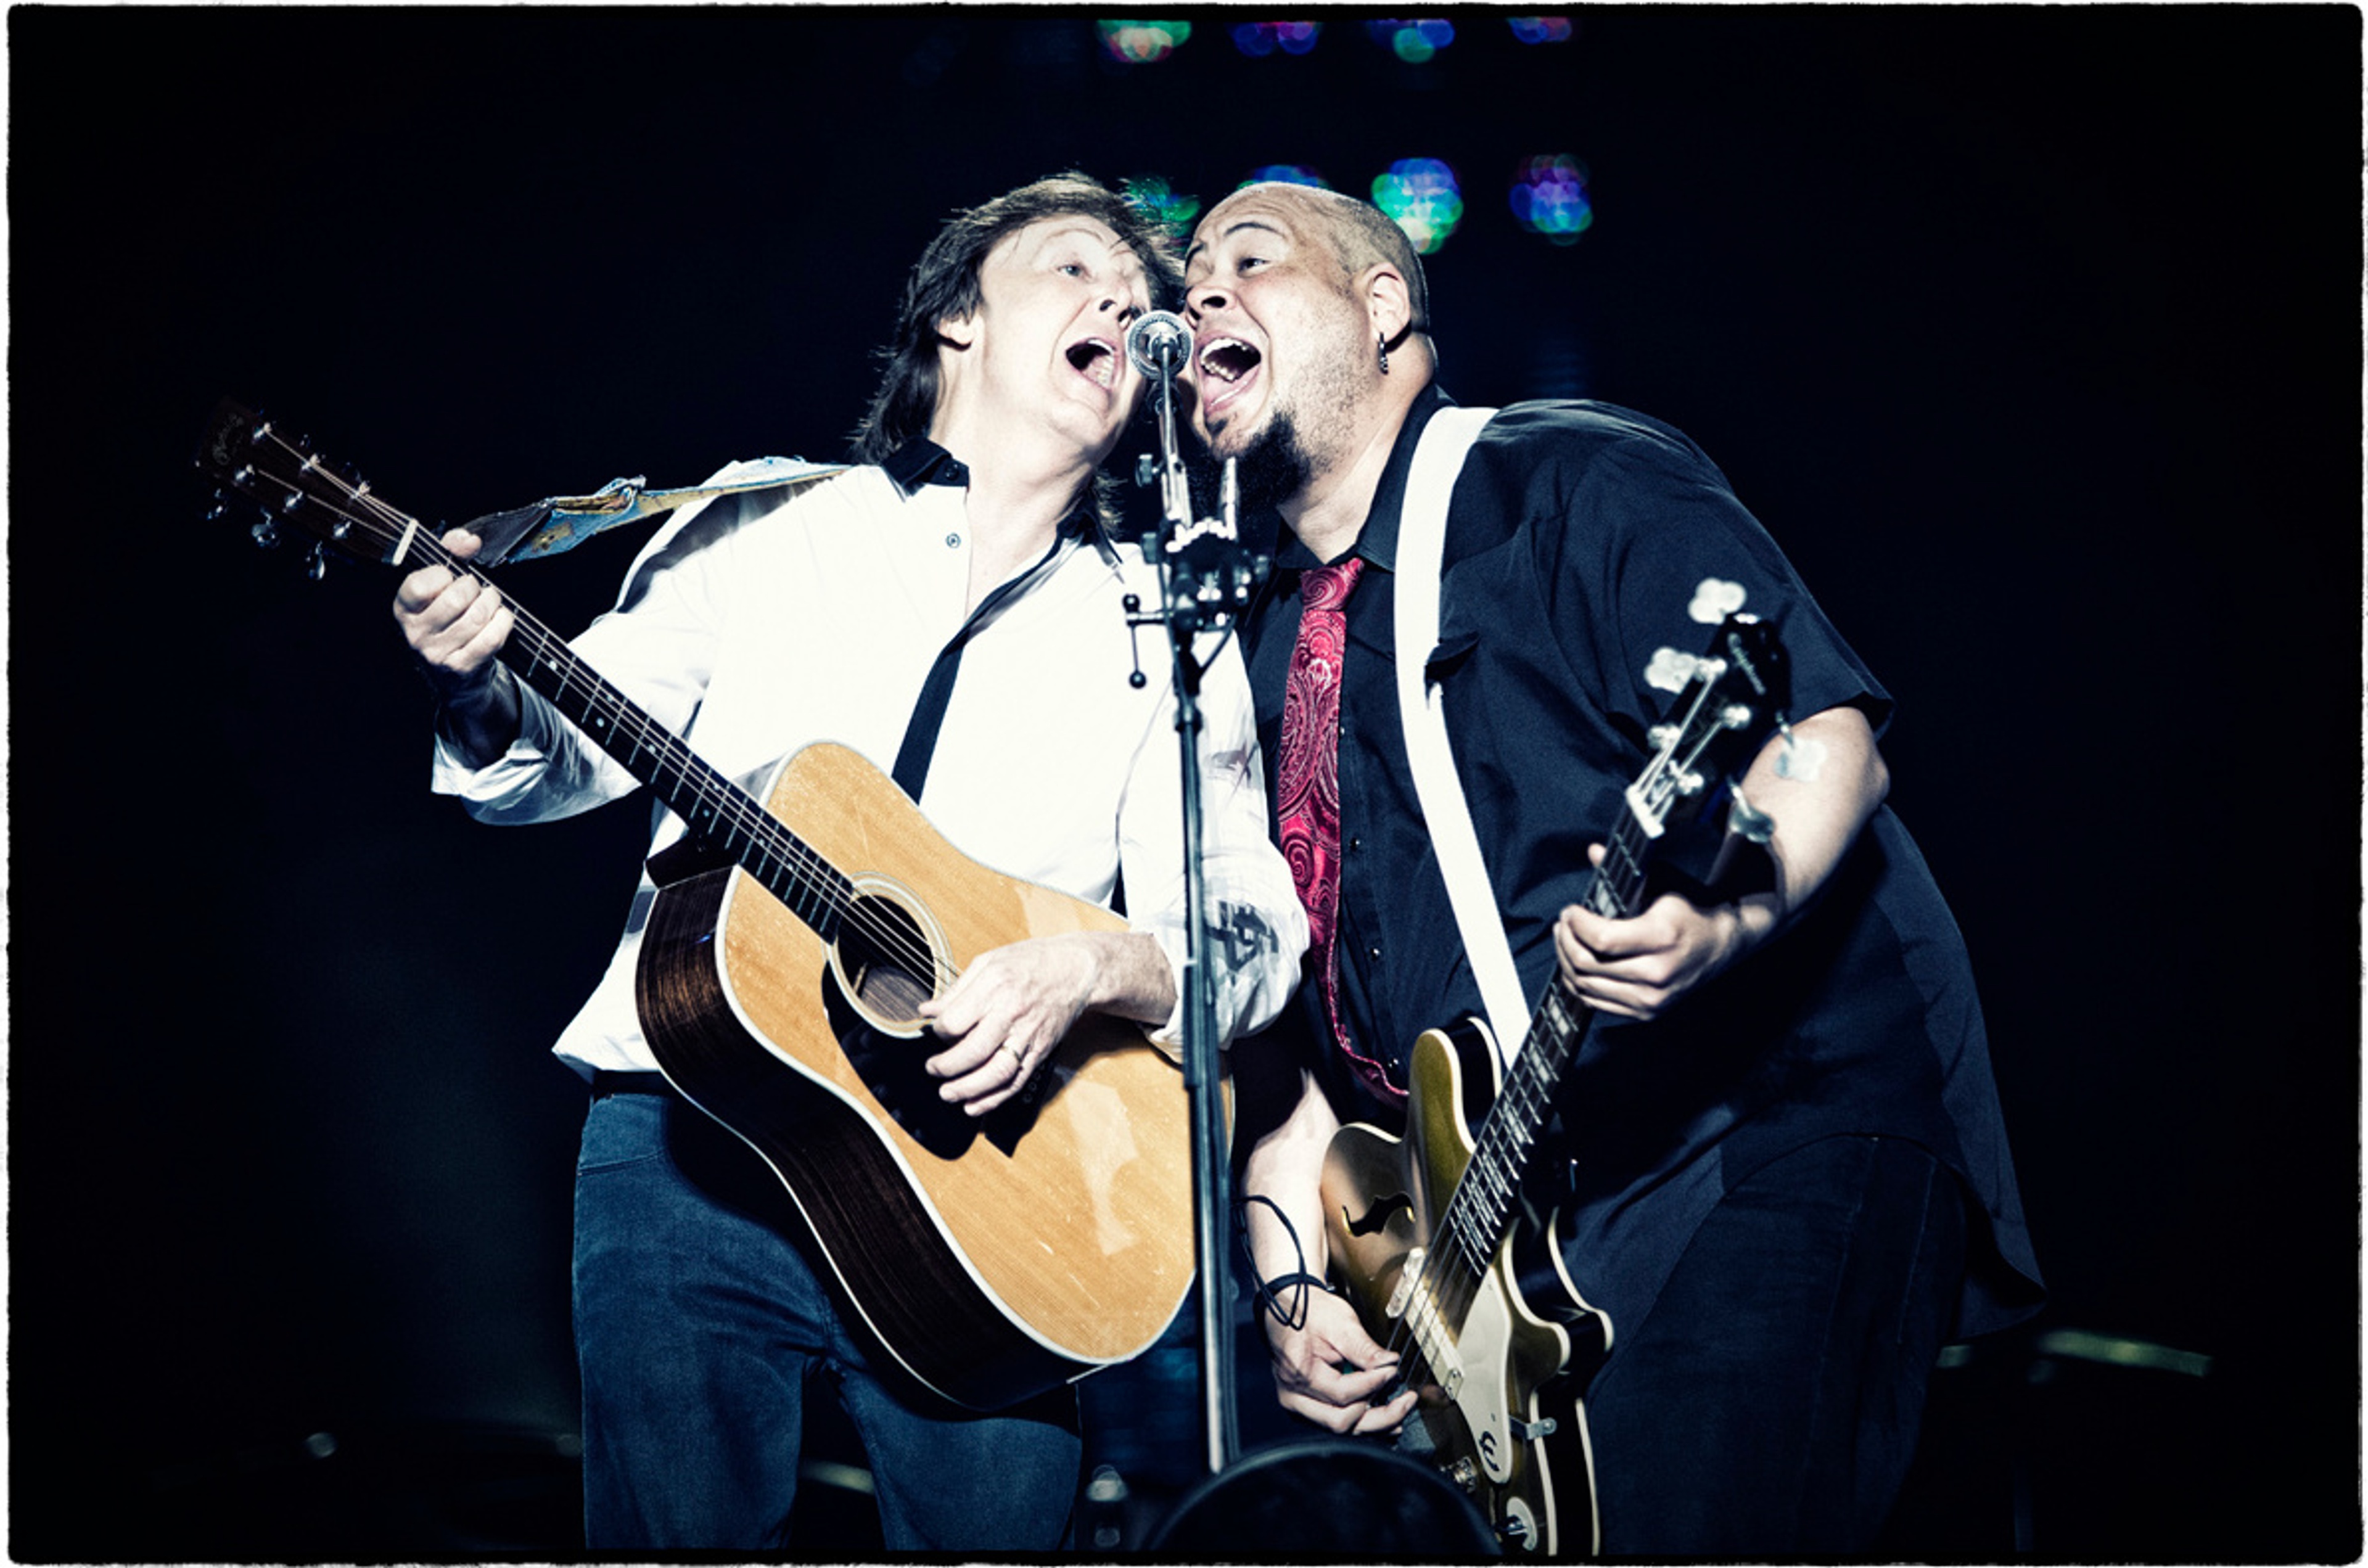 Paul and Abe sharing the mic, Belo Horizonte, Brazil, 4th May 2013